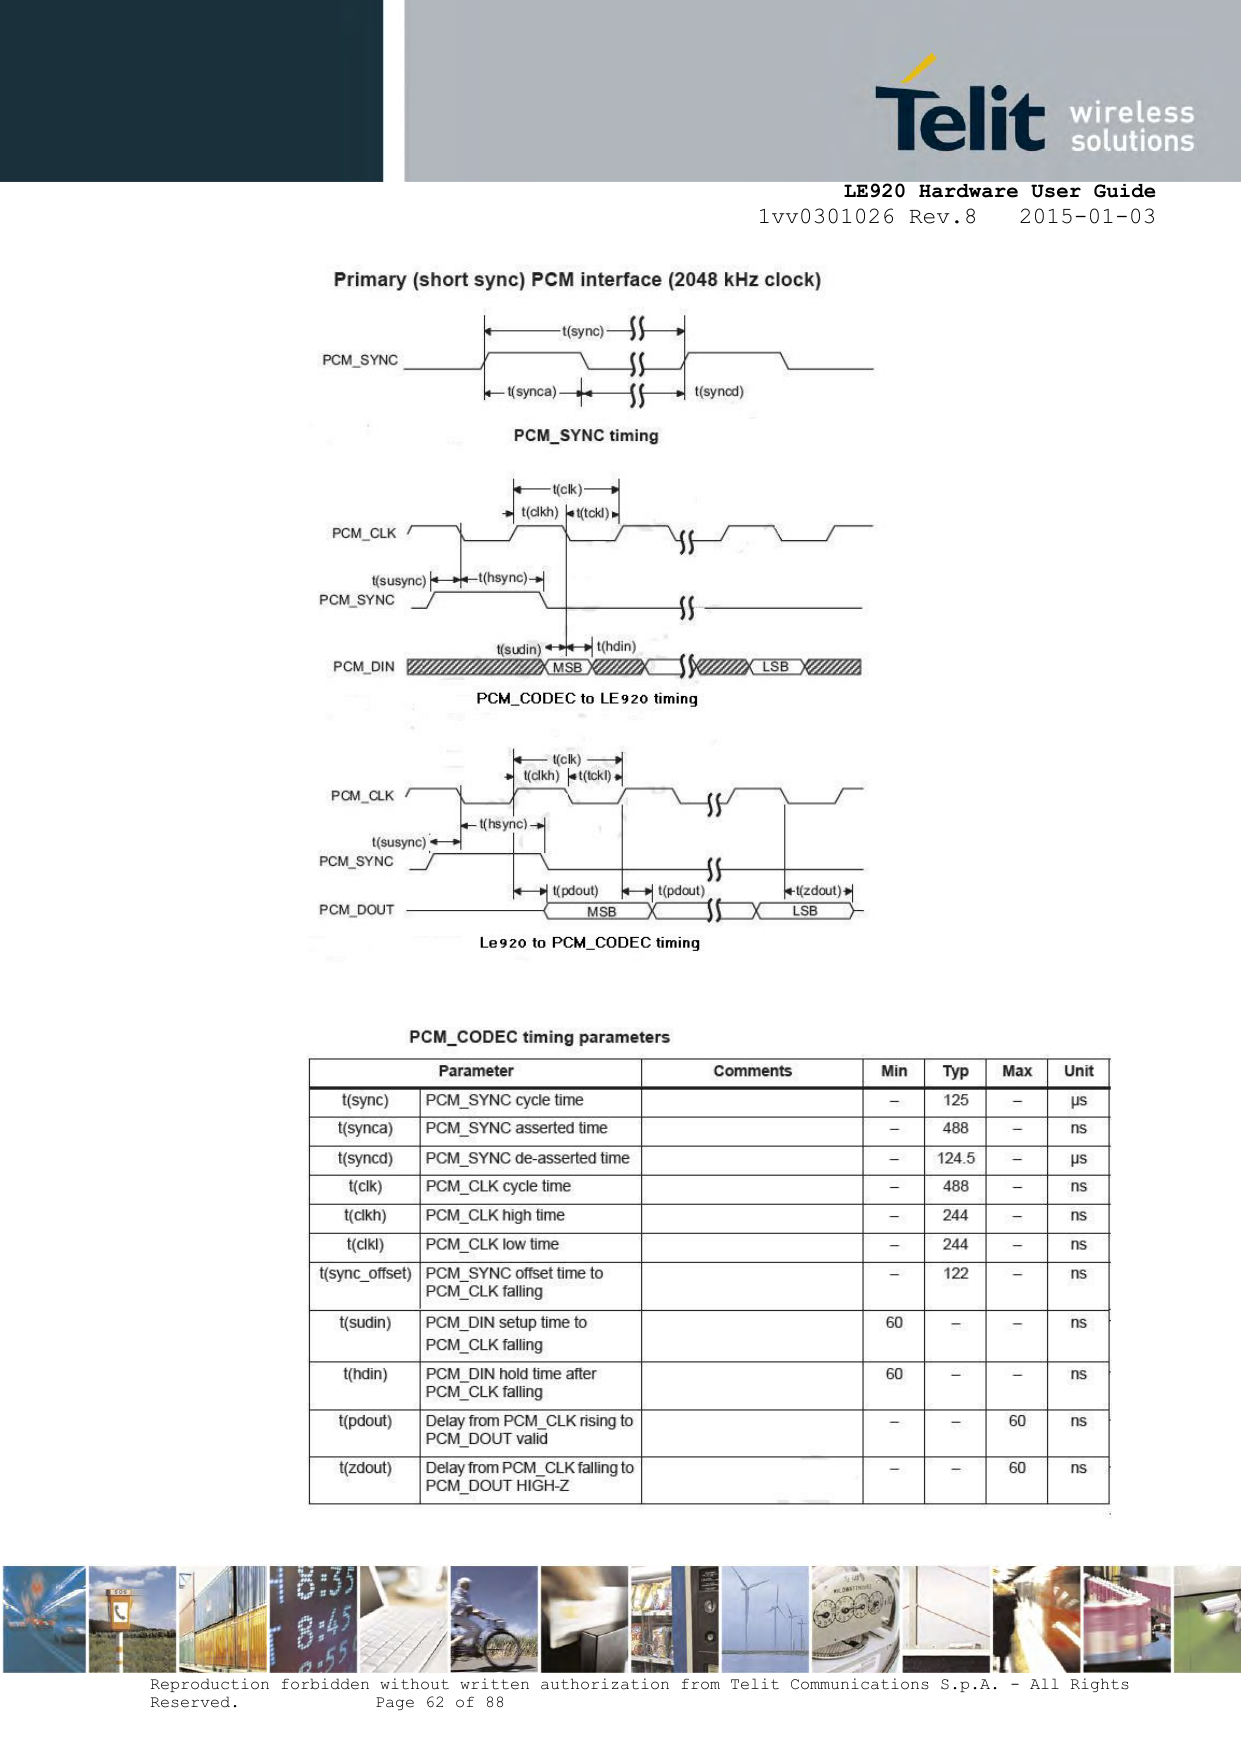     LE920 Hardware User Guide 1vv0301026 Rev.8   2015-01-03 Reproduction forbidden without written authorization from Telit Communications S.p.A. - All Rights Reserved.    Page 62 of 88       